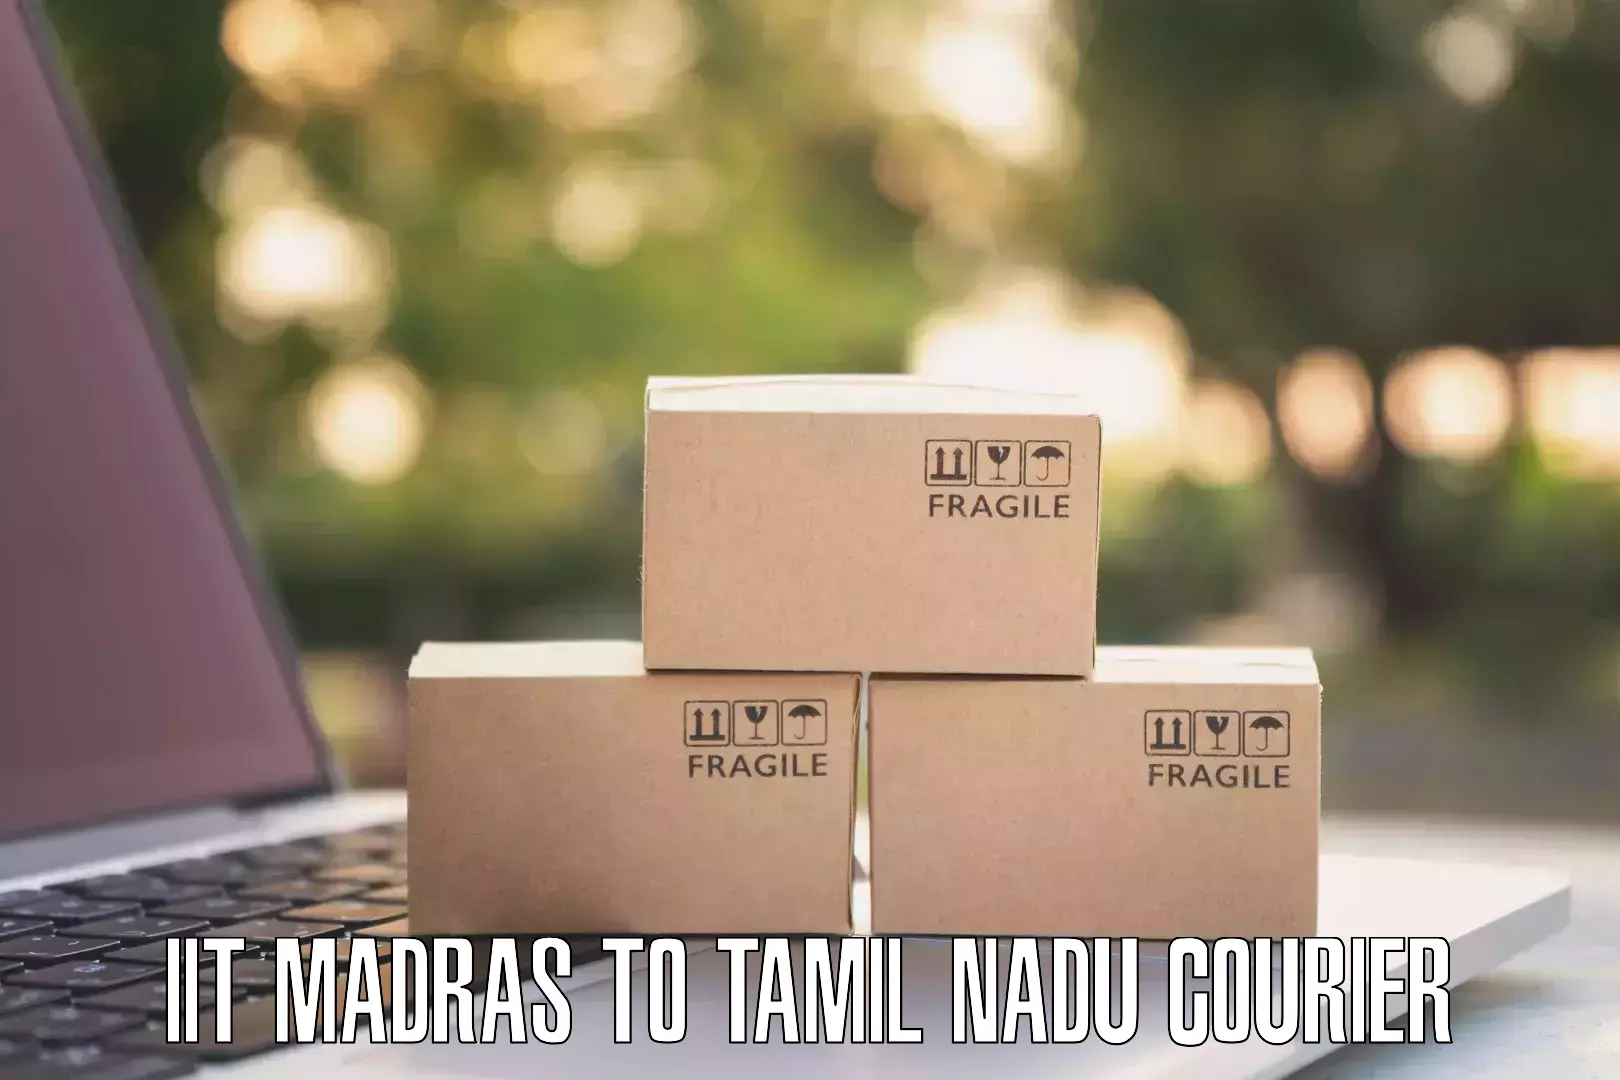 Efficient package consolidation IIT Madras to Tamil Nadu